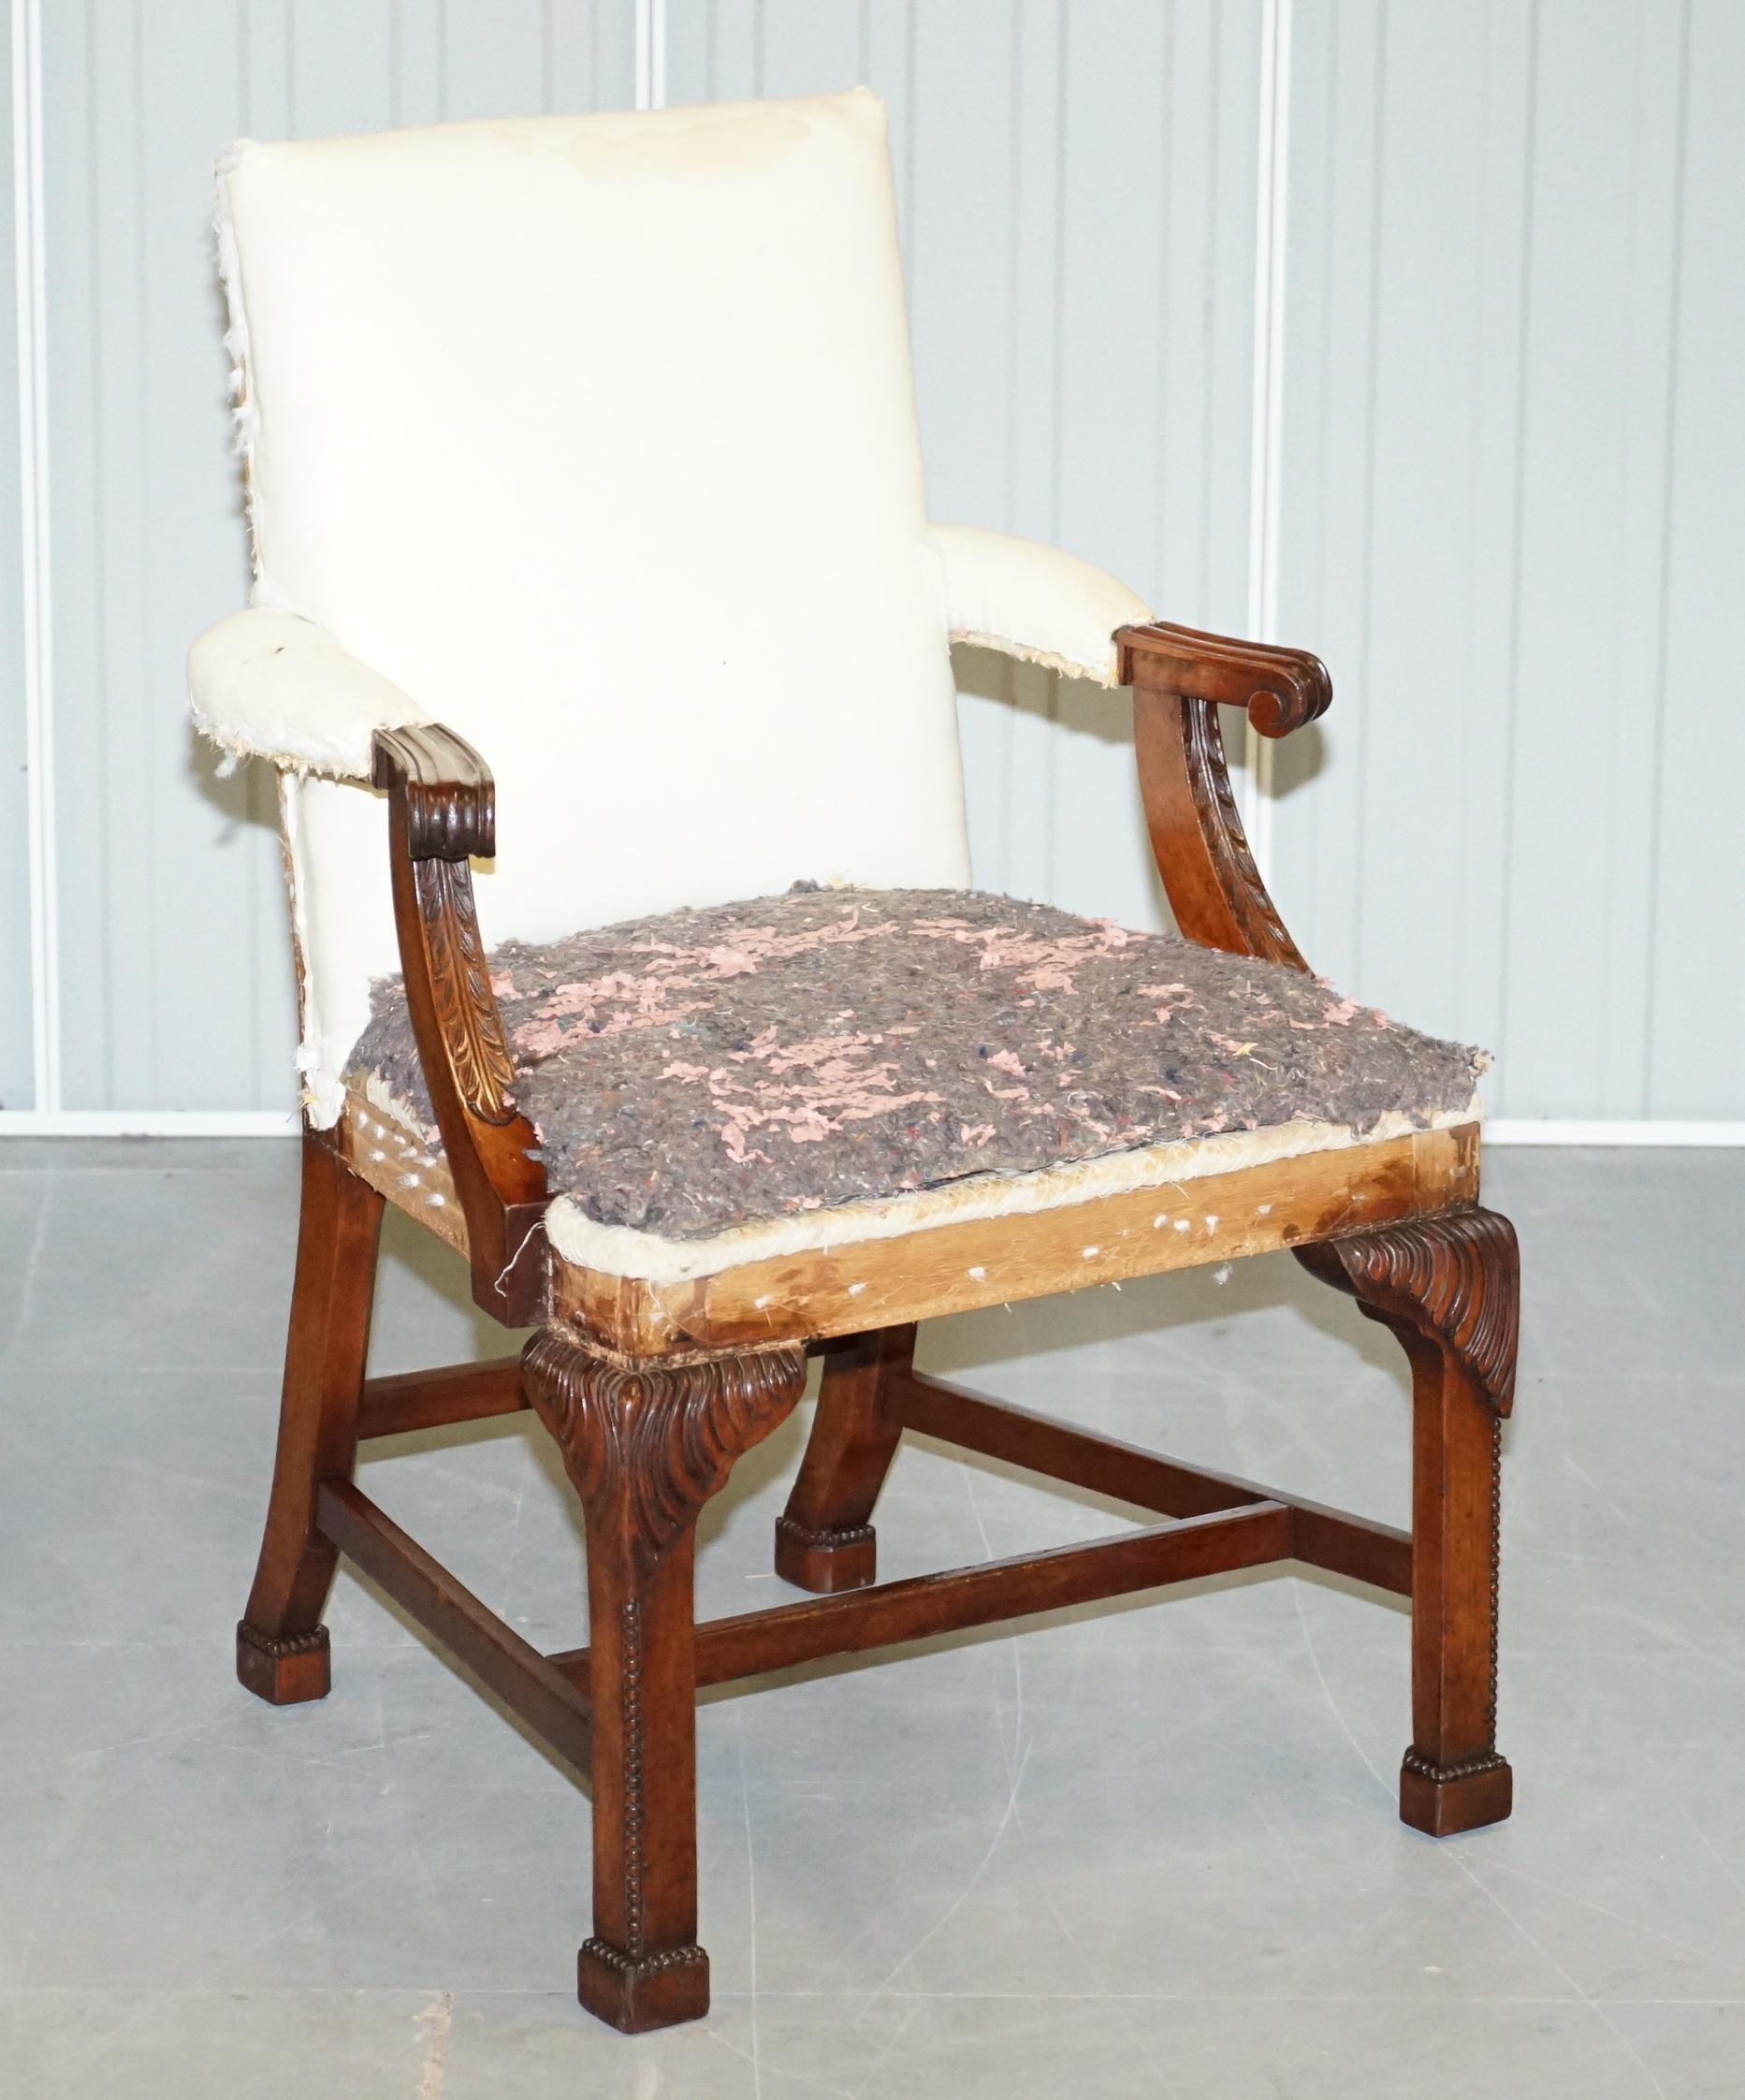 We are delighted to offer for sale this stunning pair of vintage hand carved mahogany Gainsborough armchairs which have been stripped ready for upholstery

They are an exceptional quality pair, the carving is extremely detailed on the arms and the